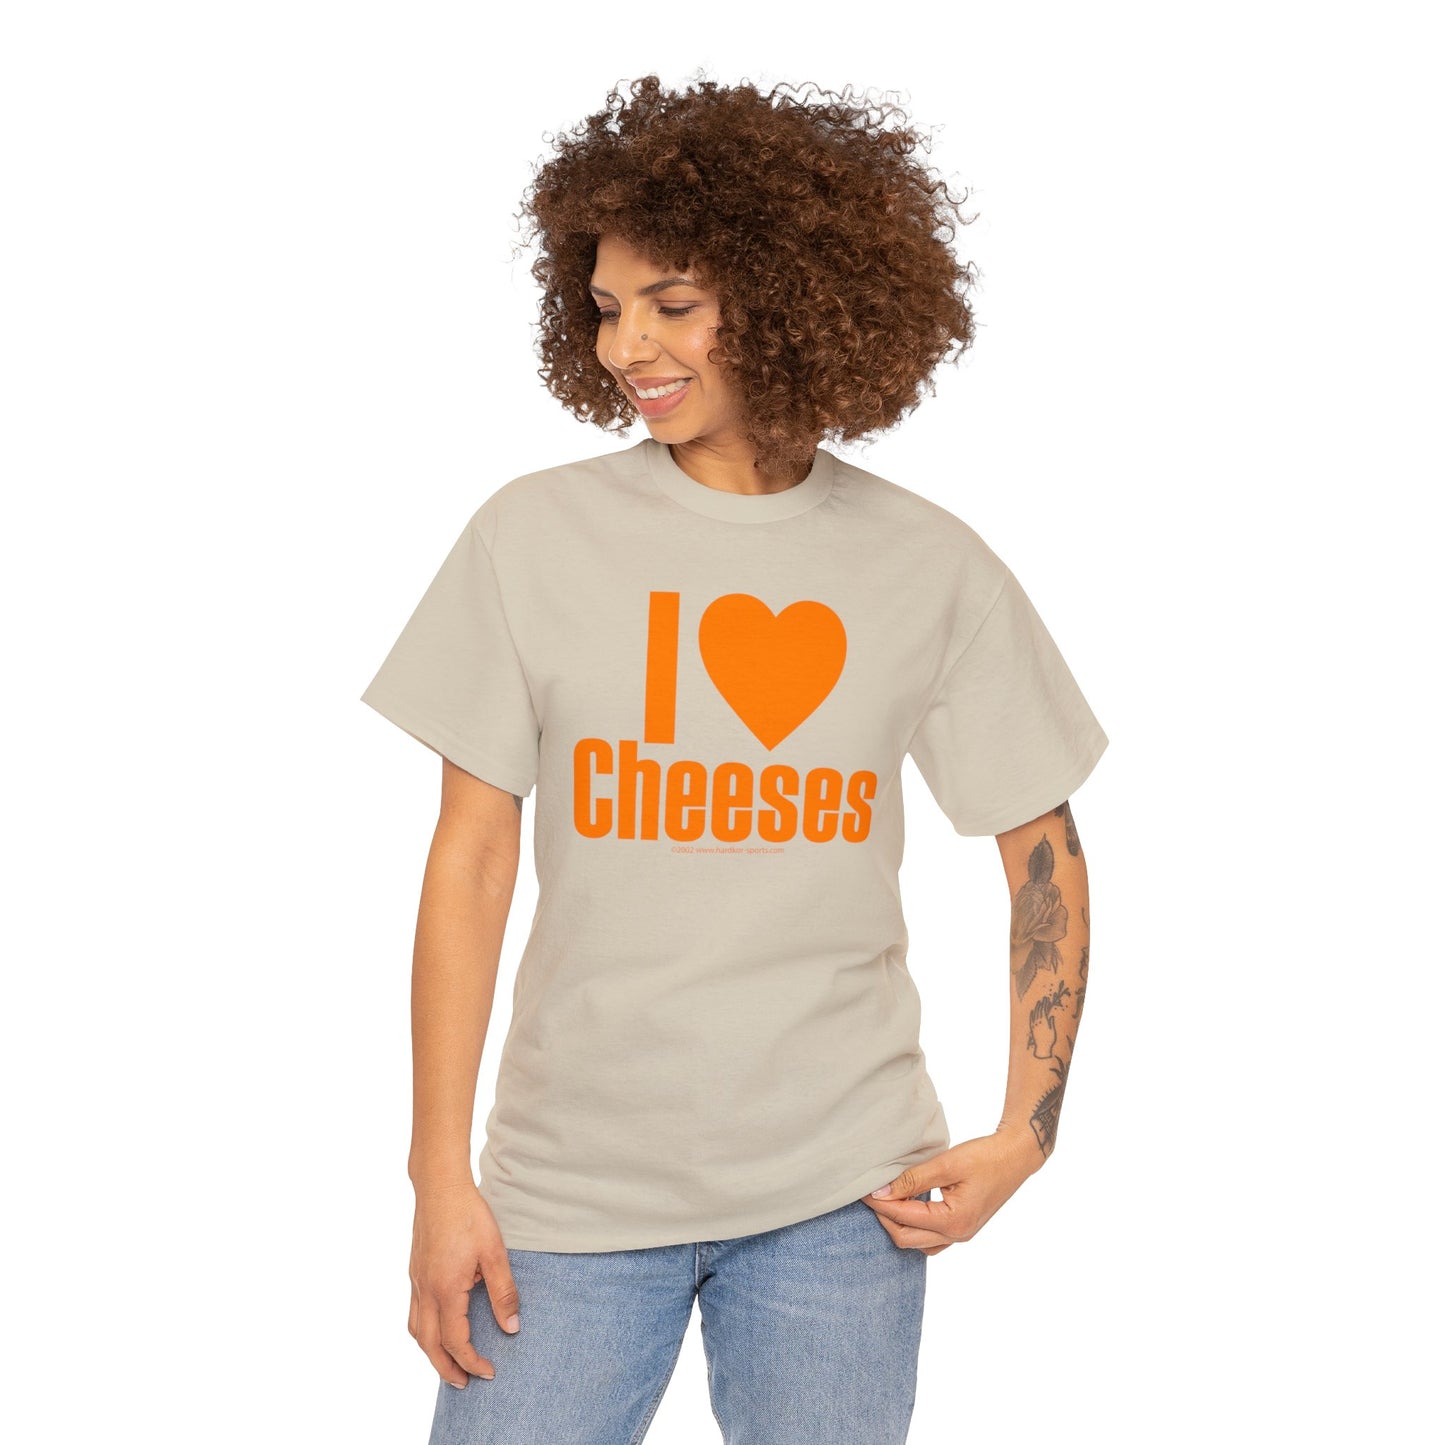 I Love Cheeses, Funny T-Shirt, Cheese Lovers Tee, I Love Jesus Parody, Christianity Spoof, Unisex Heavy Cotton Tee, Food T-Shirt,